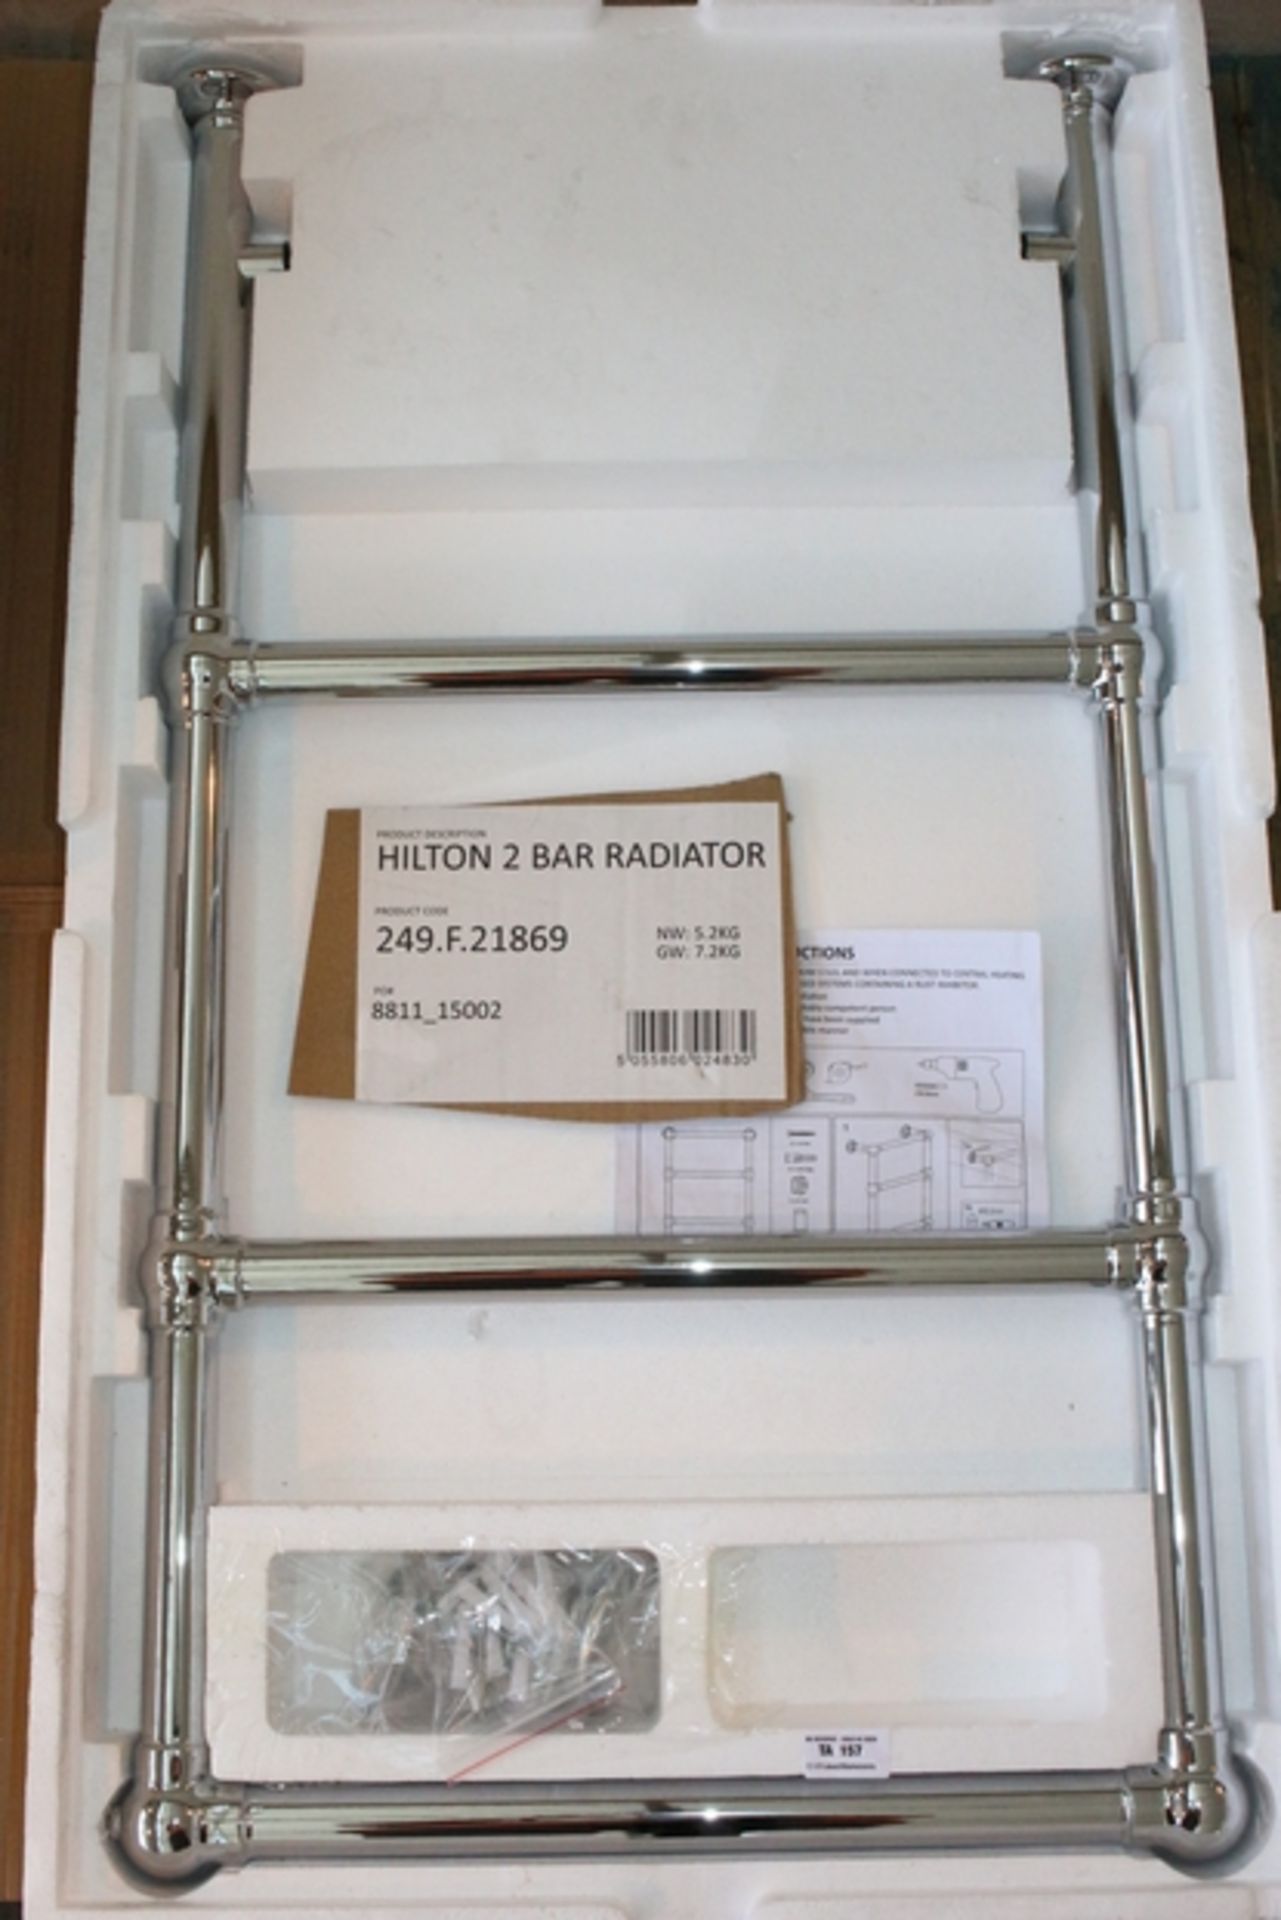 1 x HILTON 2 BAR RADIATOR *PLEASE NOTE THAT THE BID PRICE IS MULTIPLIED BY THE NUMBER OF ITEMS IN